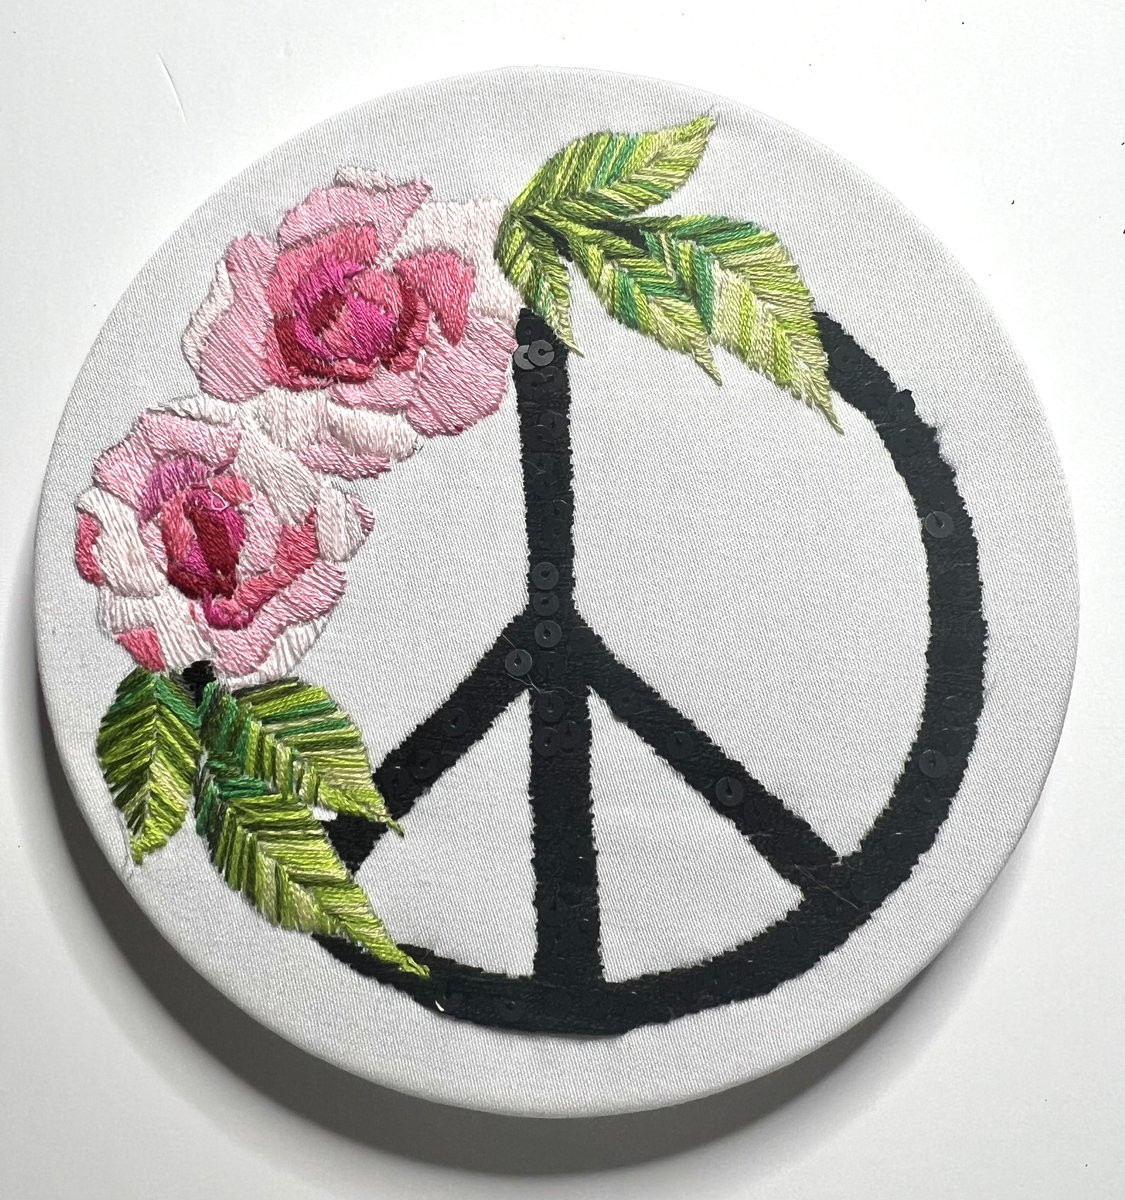 PEACE. ✌🏼
(Kit coming soon!) 
.
.
#embroidery #embroideryart #embroiderydesign #embroiderylove #embroideryartist #embroideryhoop #embroiderykit #embroiderypattern #embroideryhoopart #craft #crafting #crafter